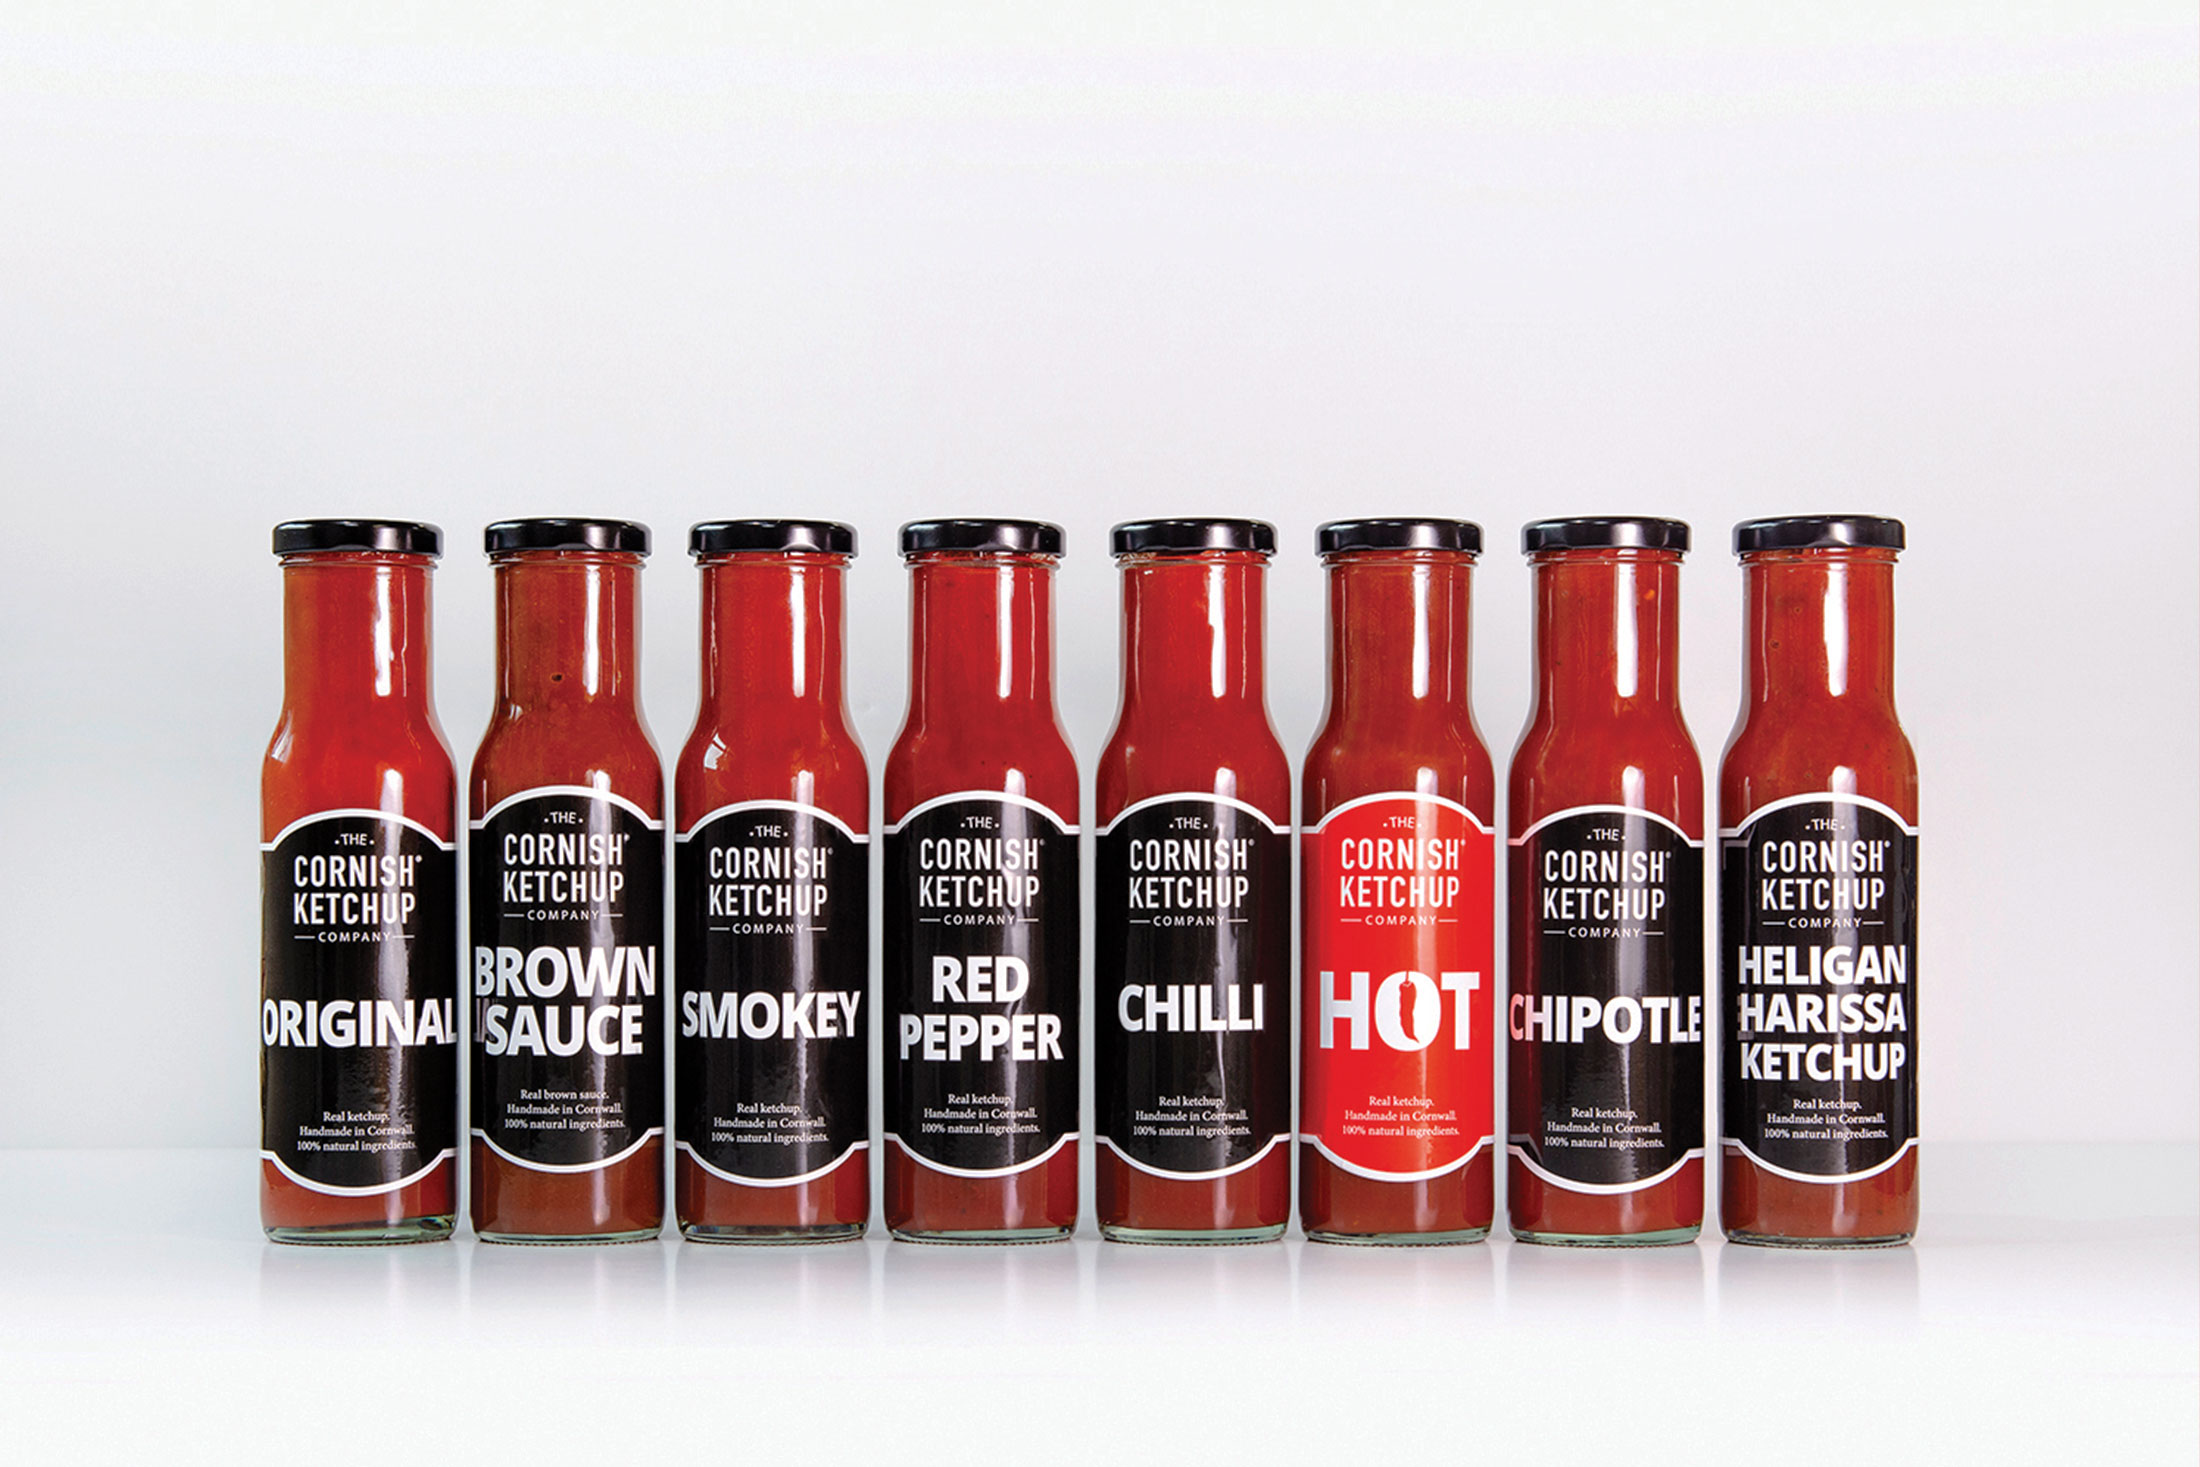 8 bottles of Cornish Ketchup in a row